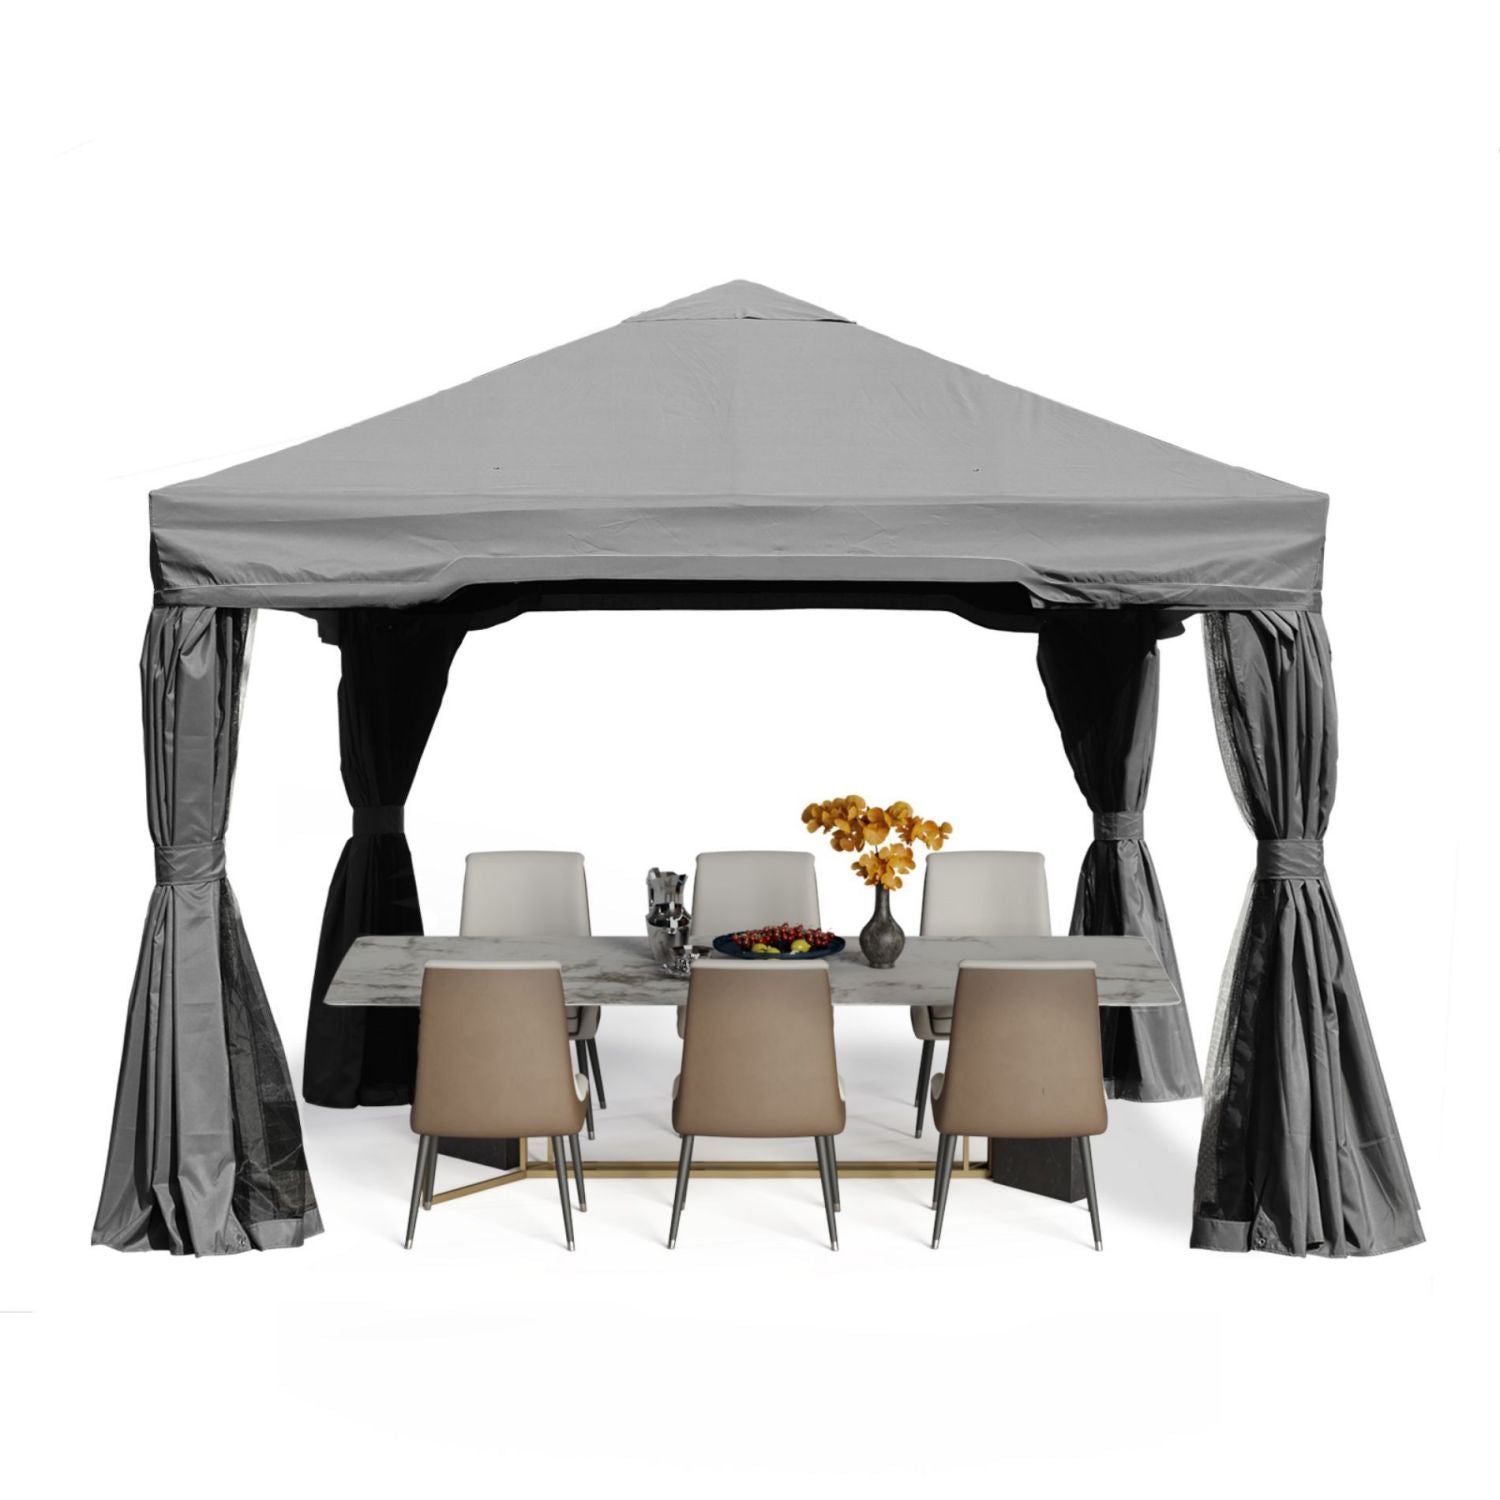 12 x 12 ft. Outdoor Gazebo Tent Canopy Shelter, Aluminum Frame with Privacy Curtain and Netting Gazebo Aoodor LLC 12' x 12' x 9' Gray 